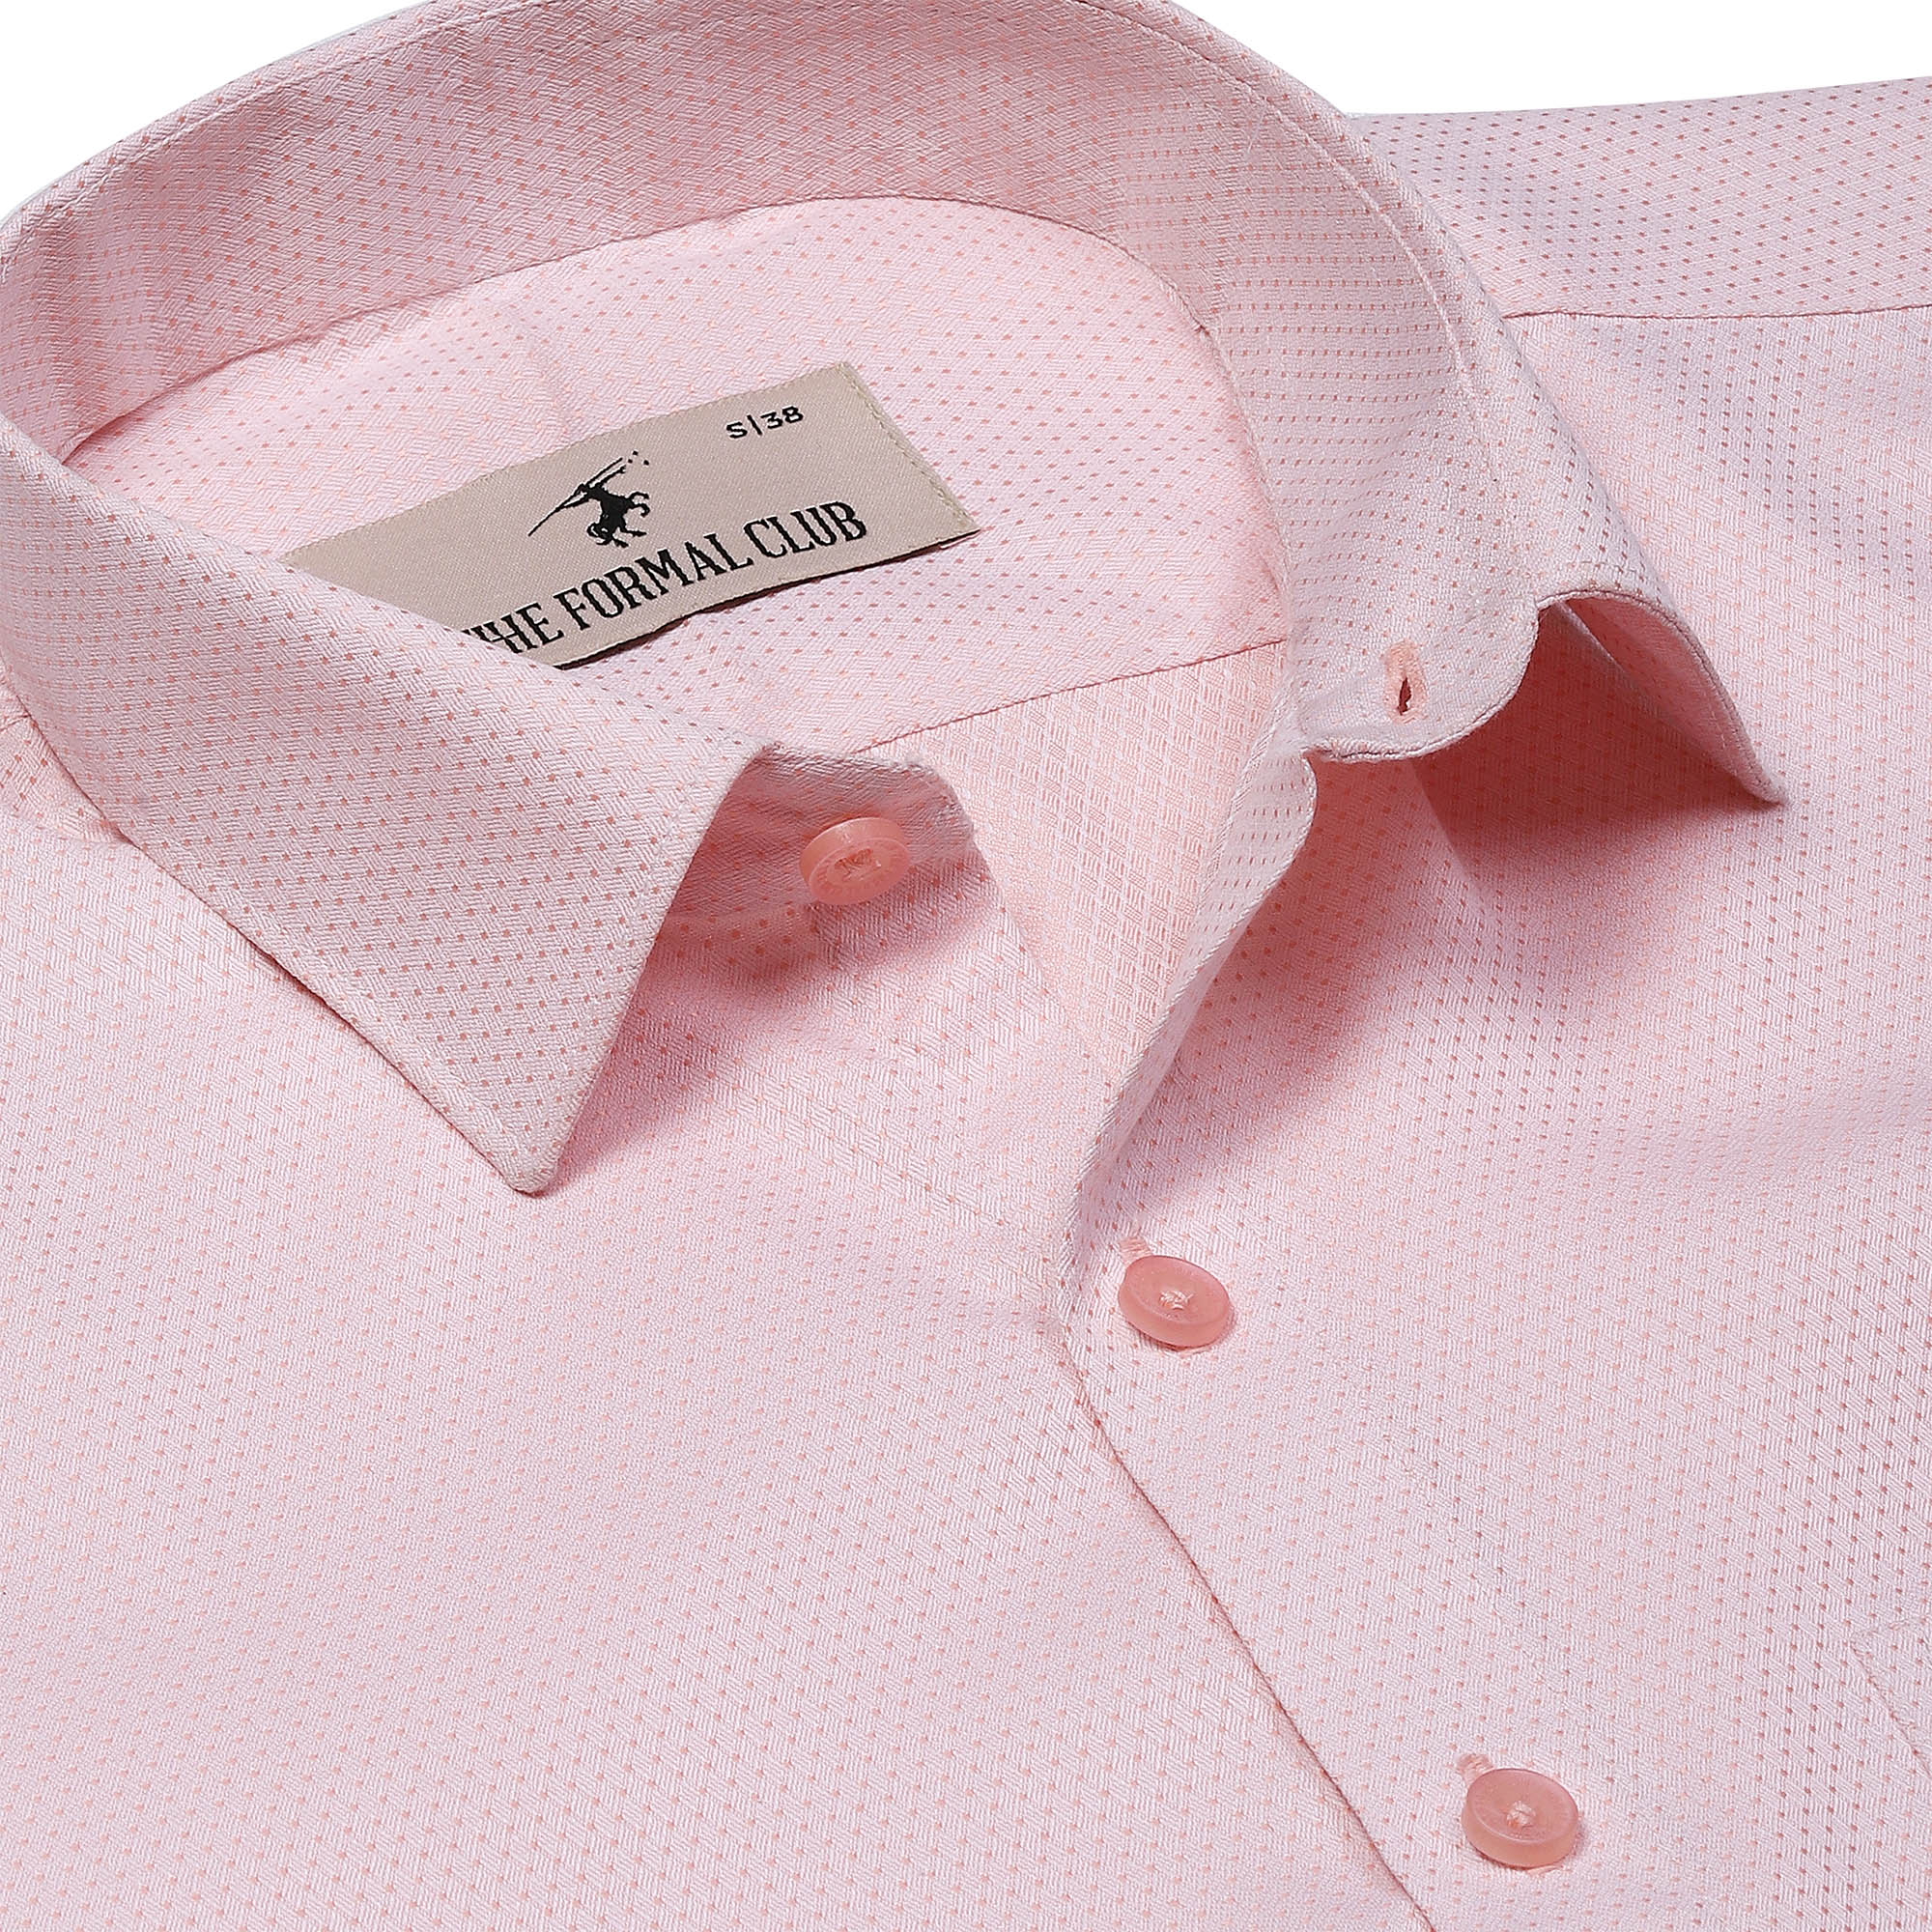 Mikey Dobby Textured Shirt in Peach - The Formal Club